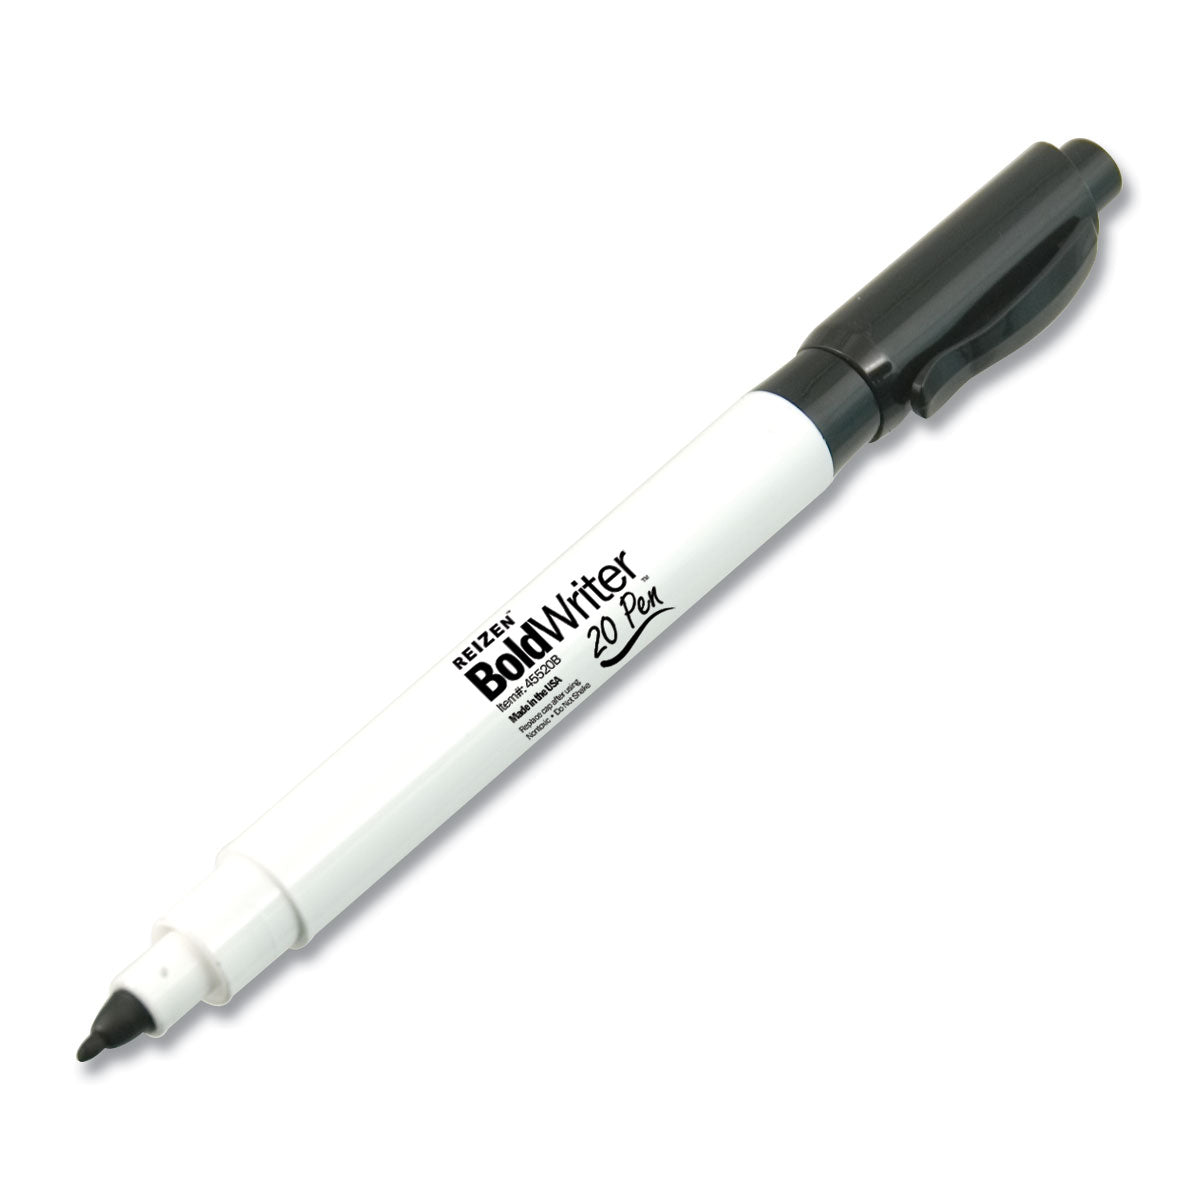 A bold writer pen with the tip exposed and ready to write down your wants and desires